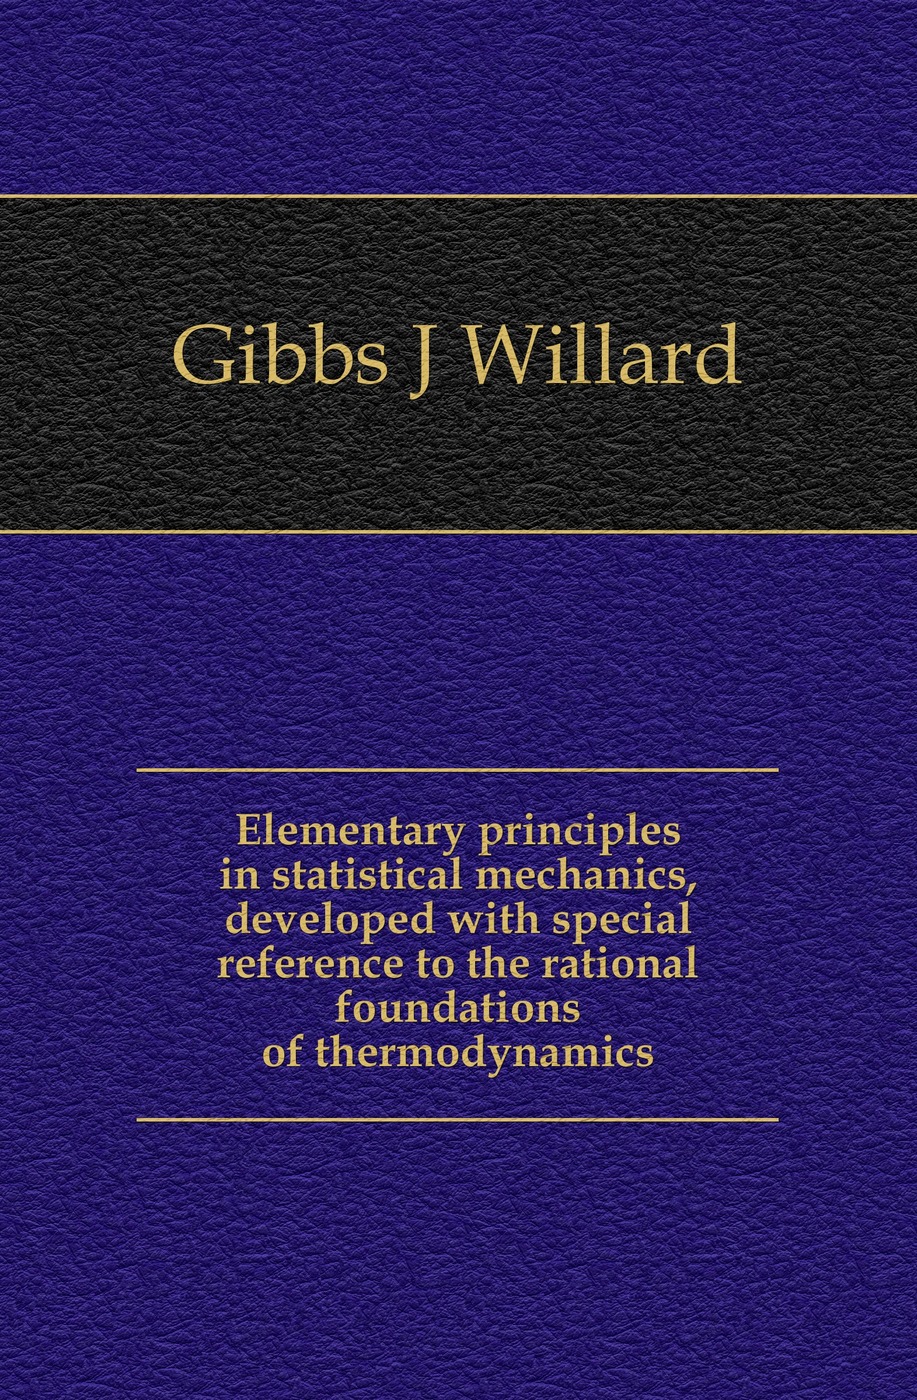 Elementary principles in statistical mechanics, developed with special reference to the rational foundations of thermodynamics